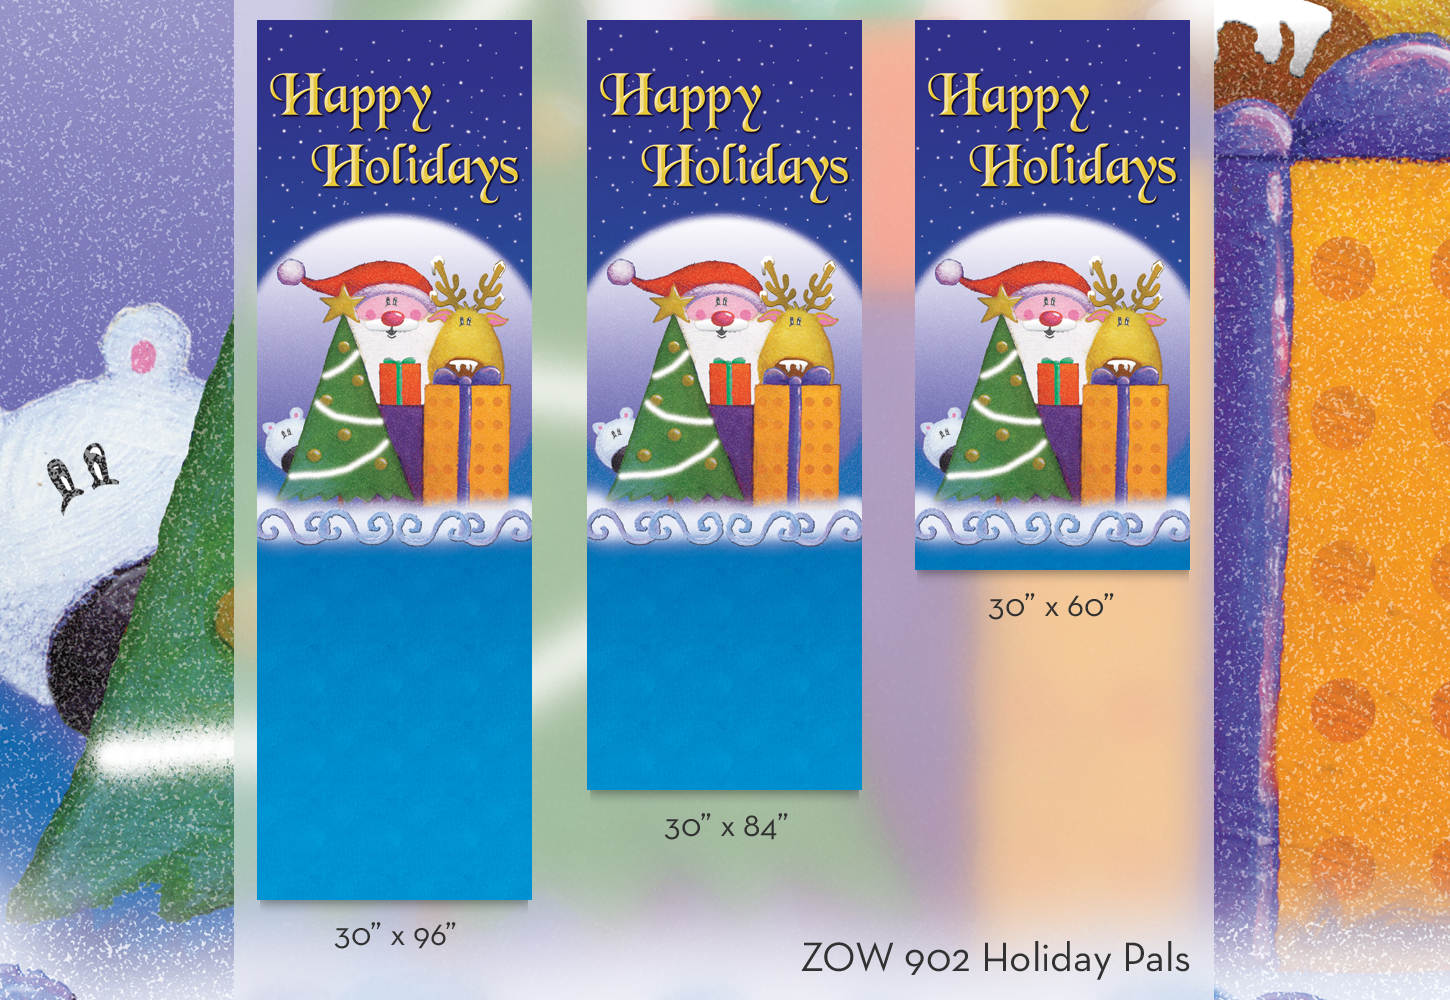 ZOW 902 Holiday Pals